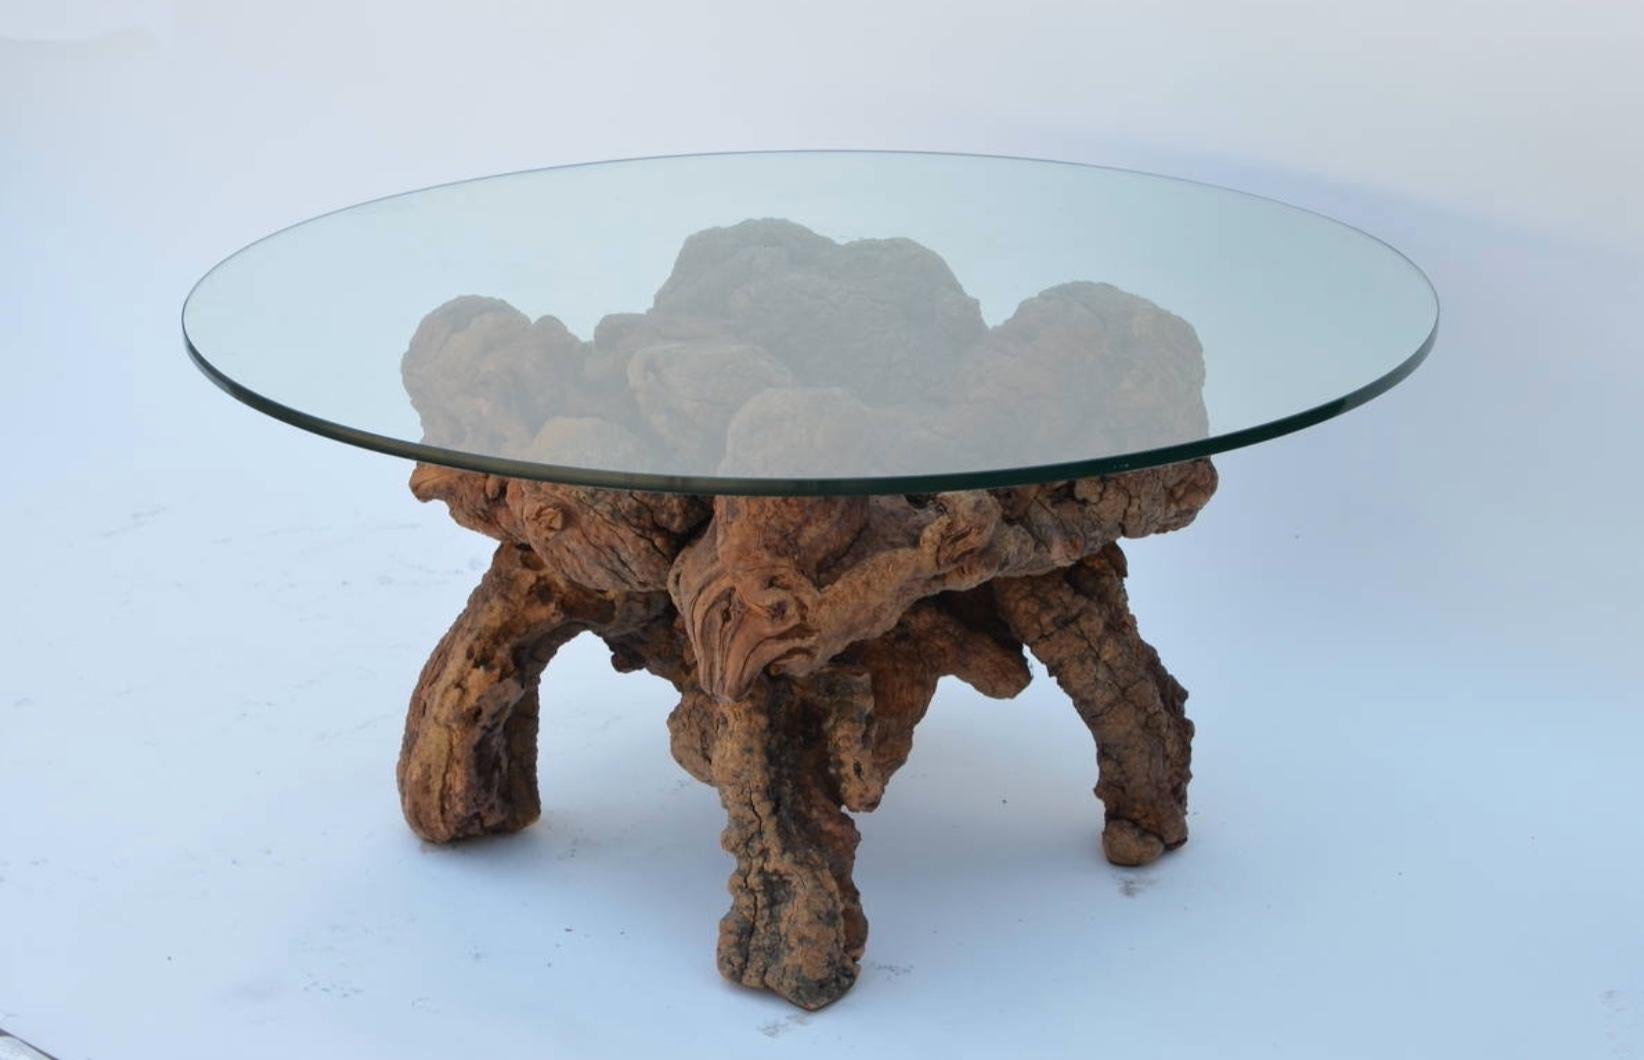 Organic Modern Quadripod wood and glass coffee table. Sculptural natural bog wood base contrasting with the simple glass top (1/2 in. thickness).